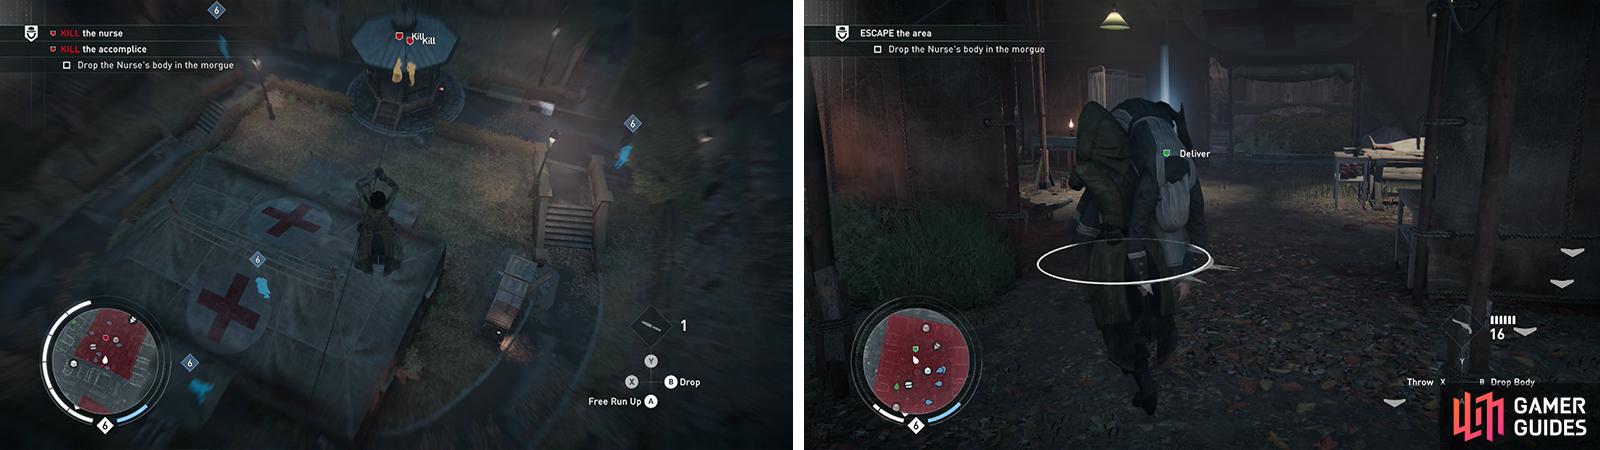 The targets will occasionally come together in the gazebo (left). After killing them throw the nurse's body in the morgue for the optional objective (right).